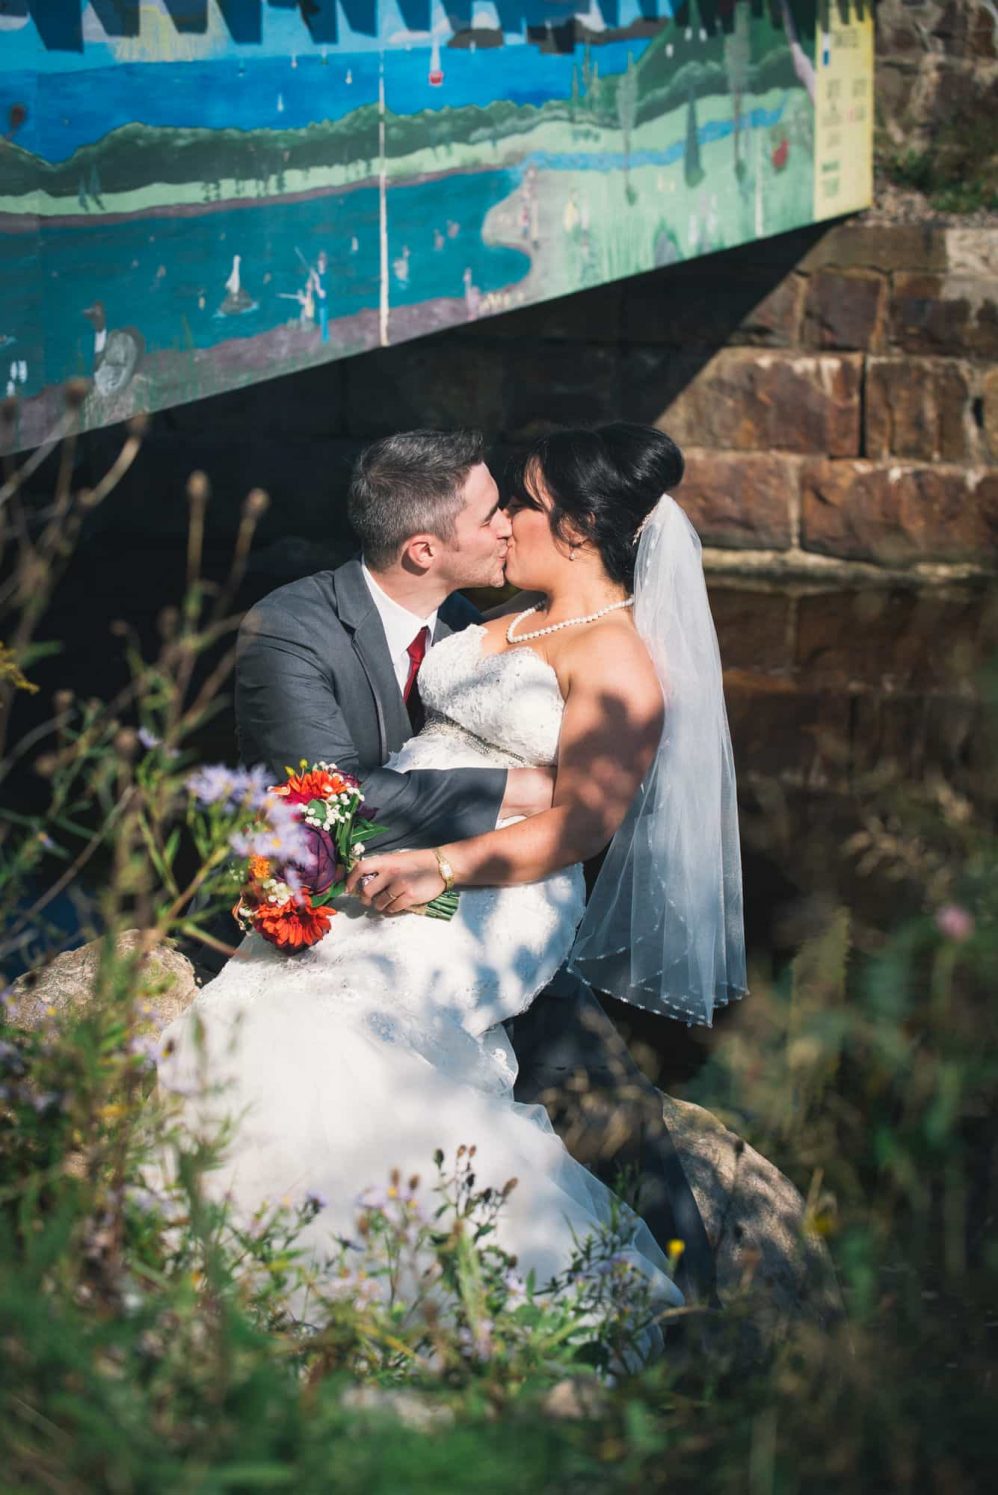 The bride and groom kiss near a river and the bridge.